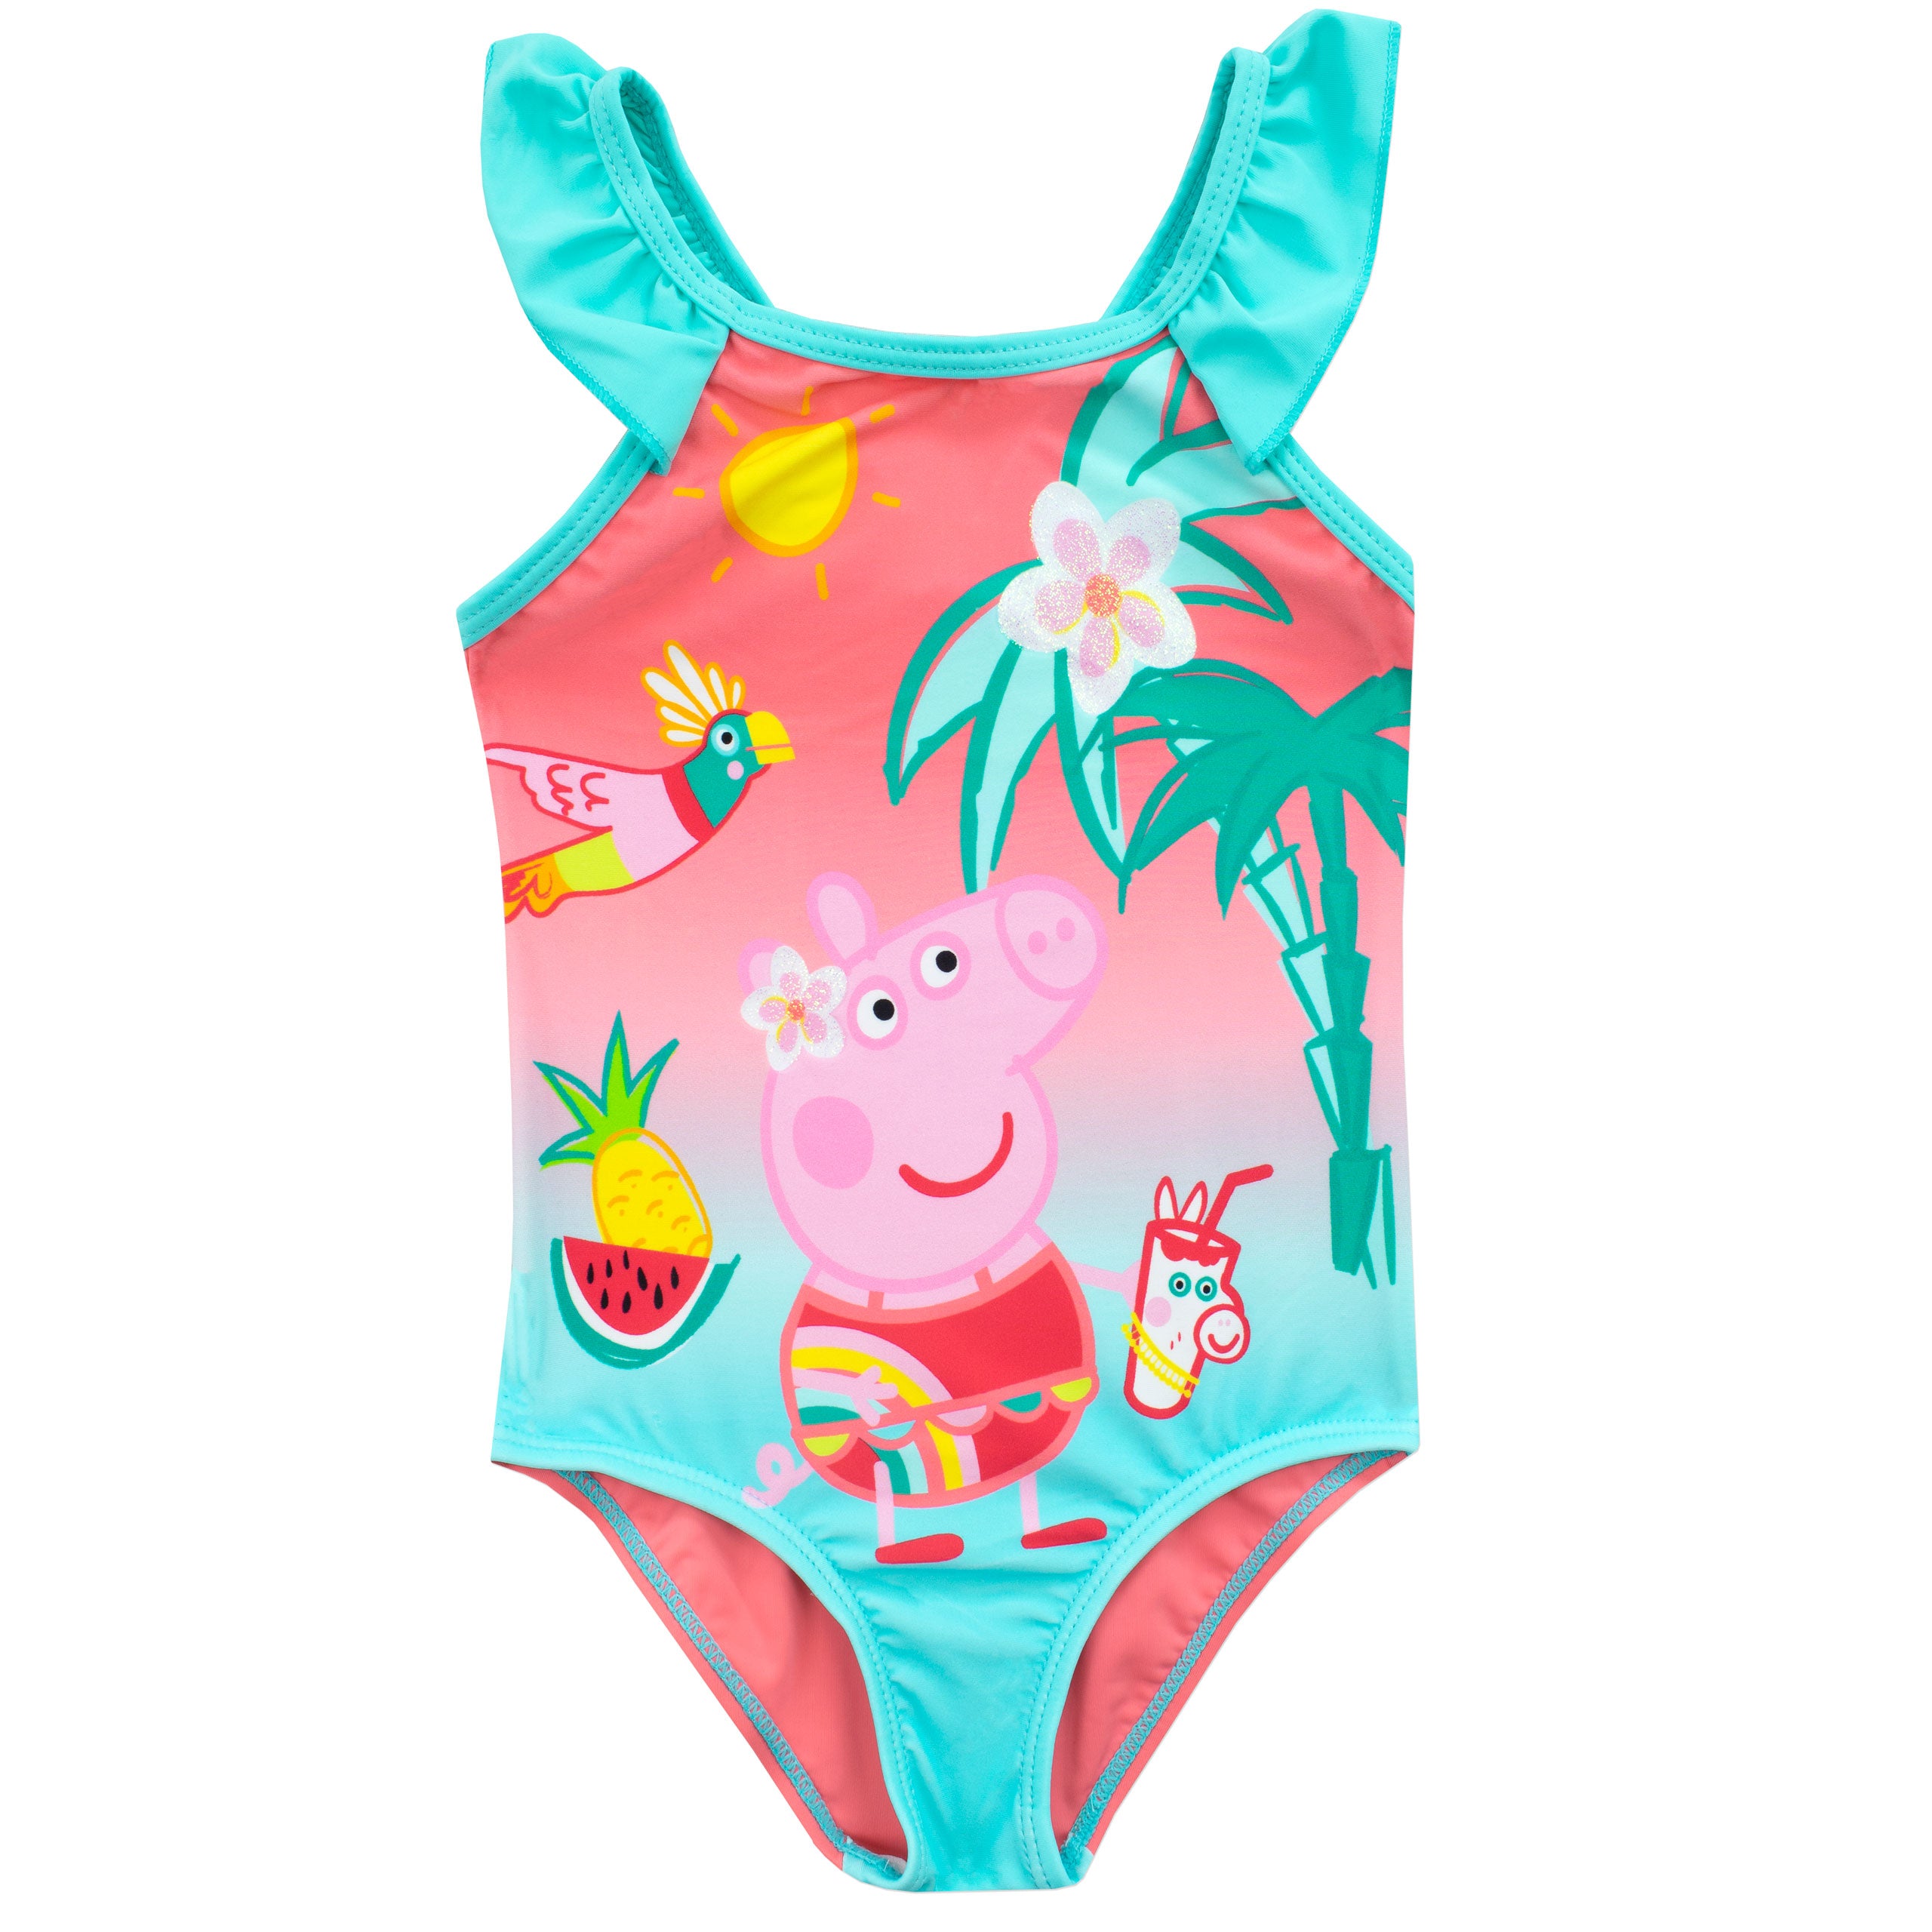 Peppa Pig Swimsuit | Kids | Official Character.com Merchandise